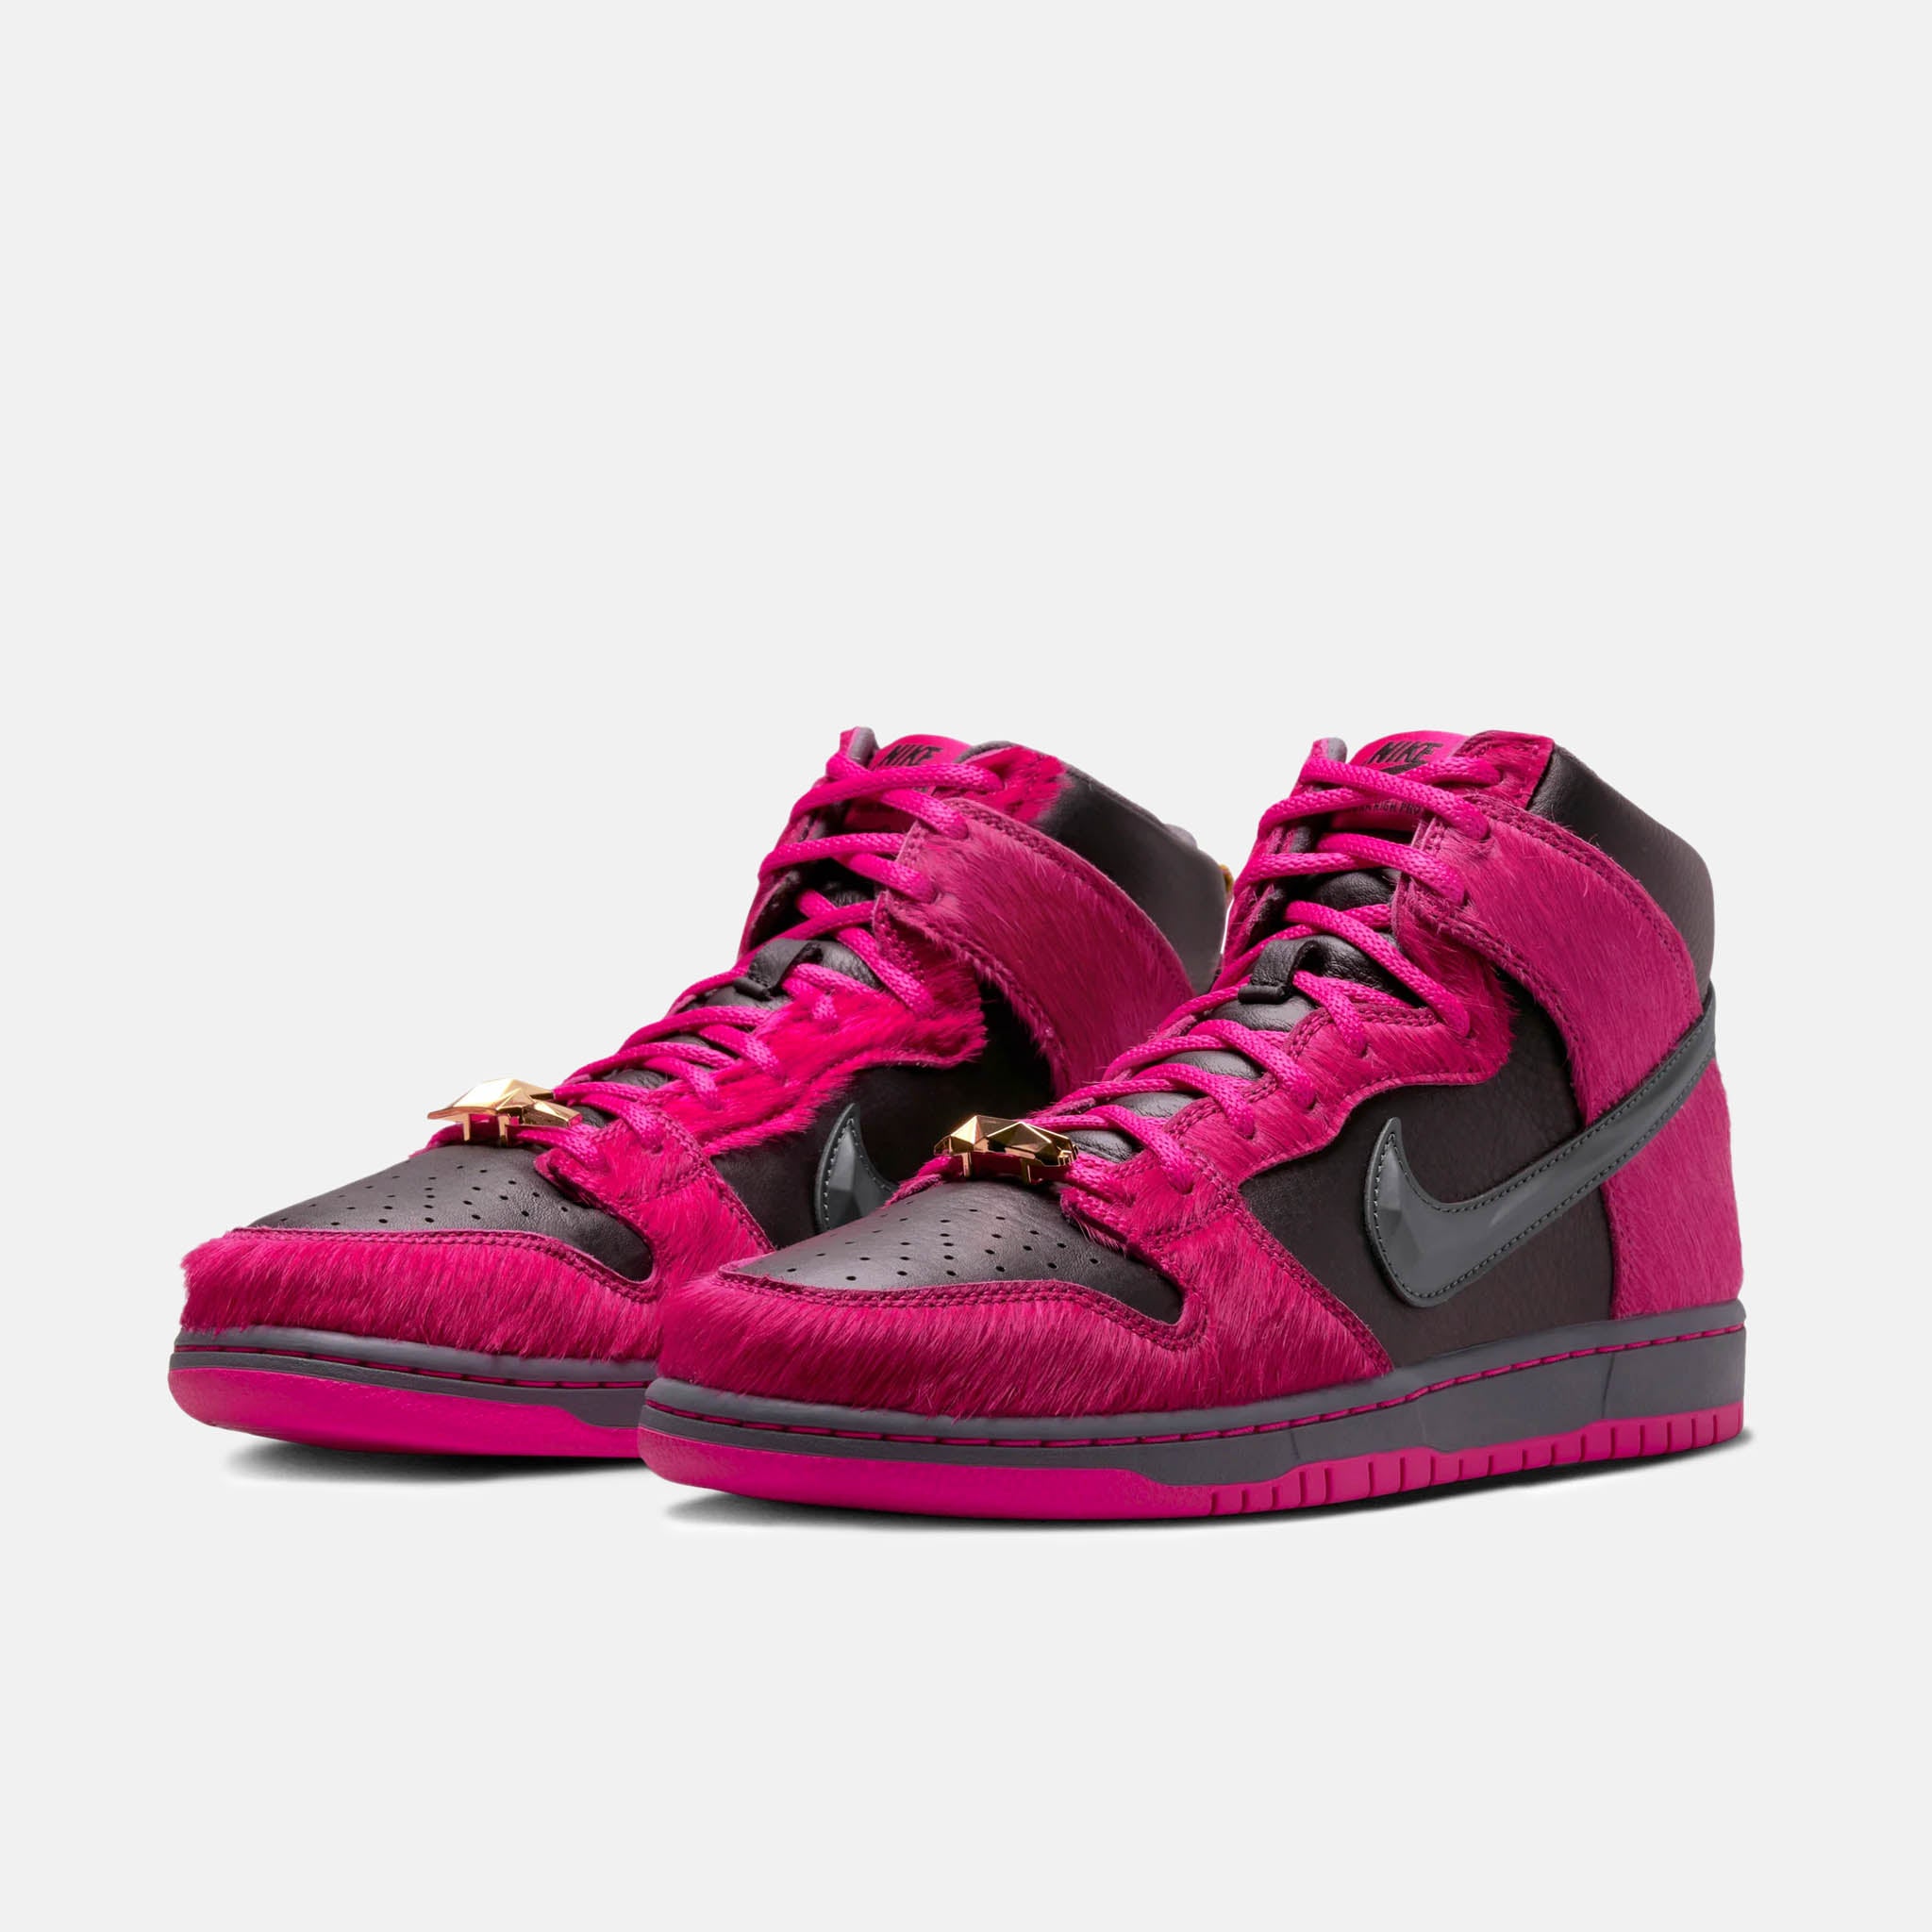 Nike SB - Run The Jewels Dunk High Pro Shoes - Active Pink / Black